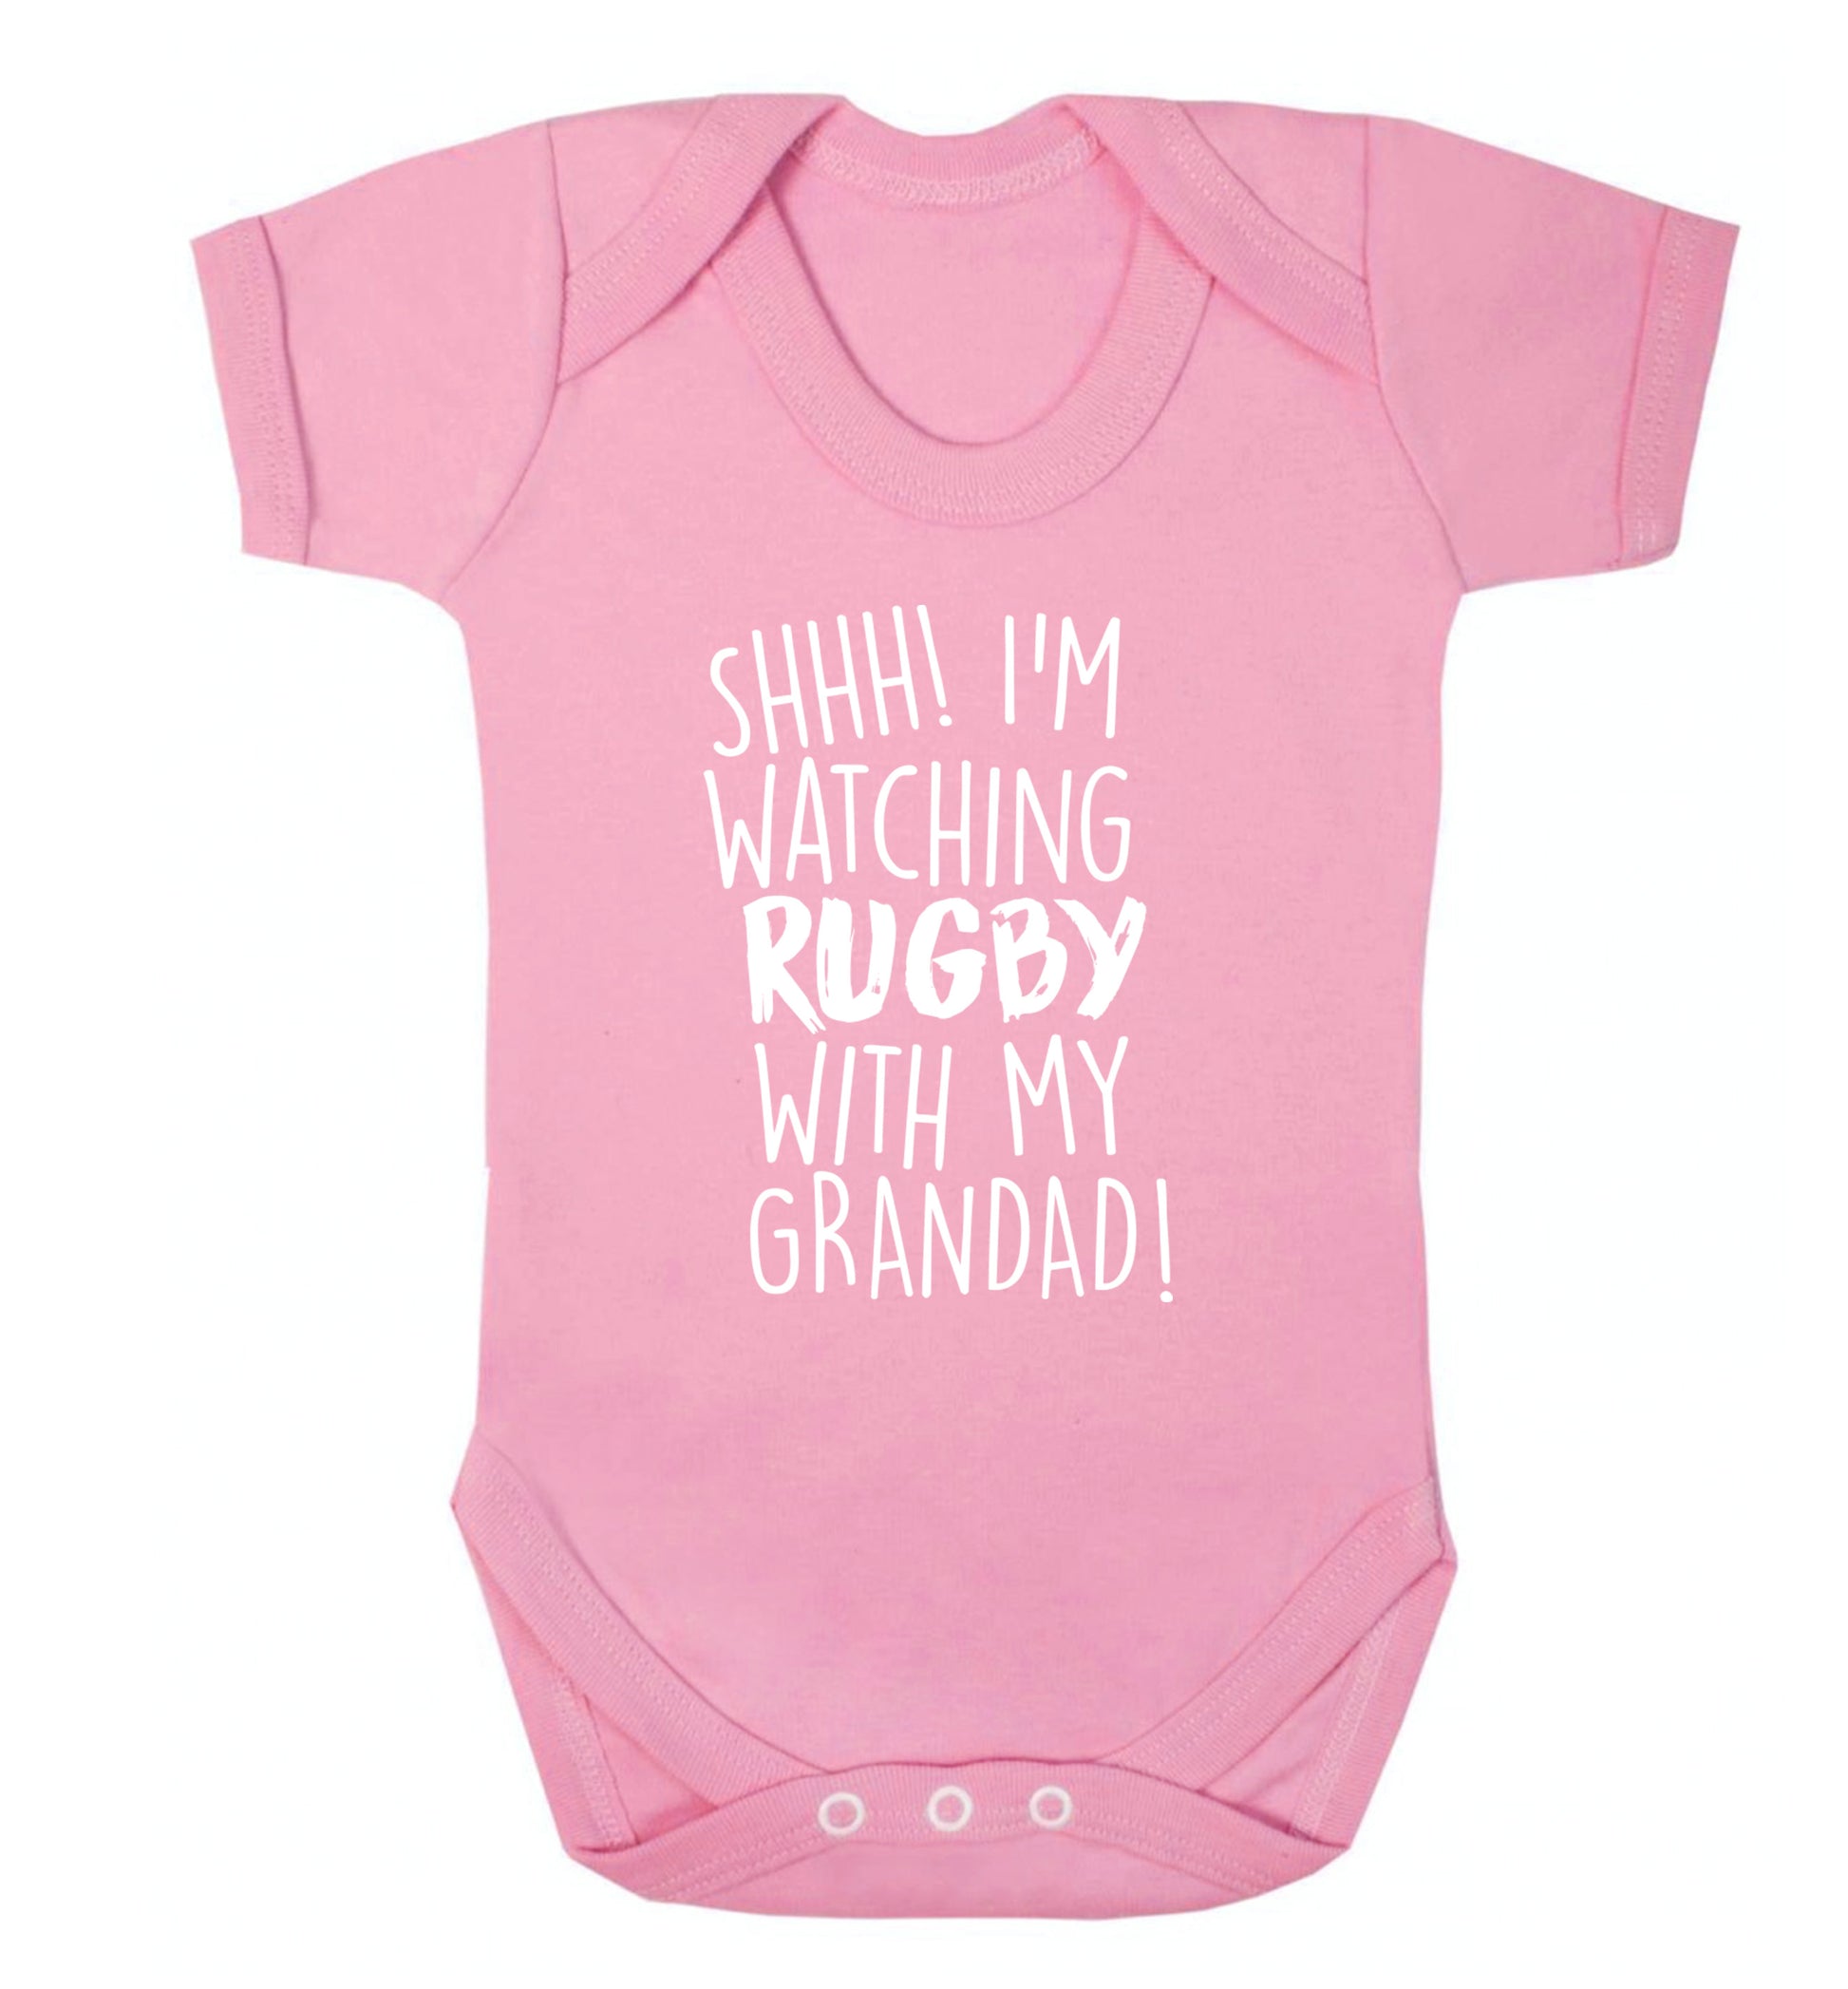 Shh I'm watching rugby with my grandaughter Baby Vest pale pink 18-24 months